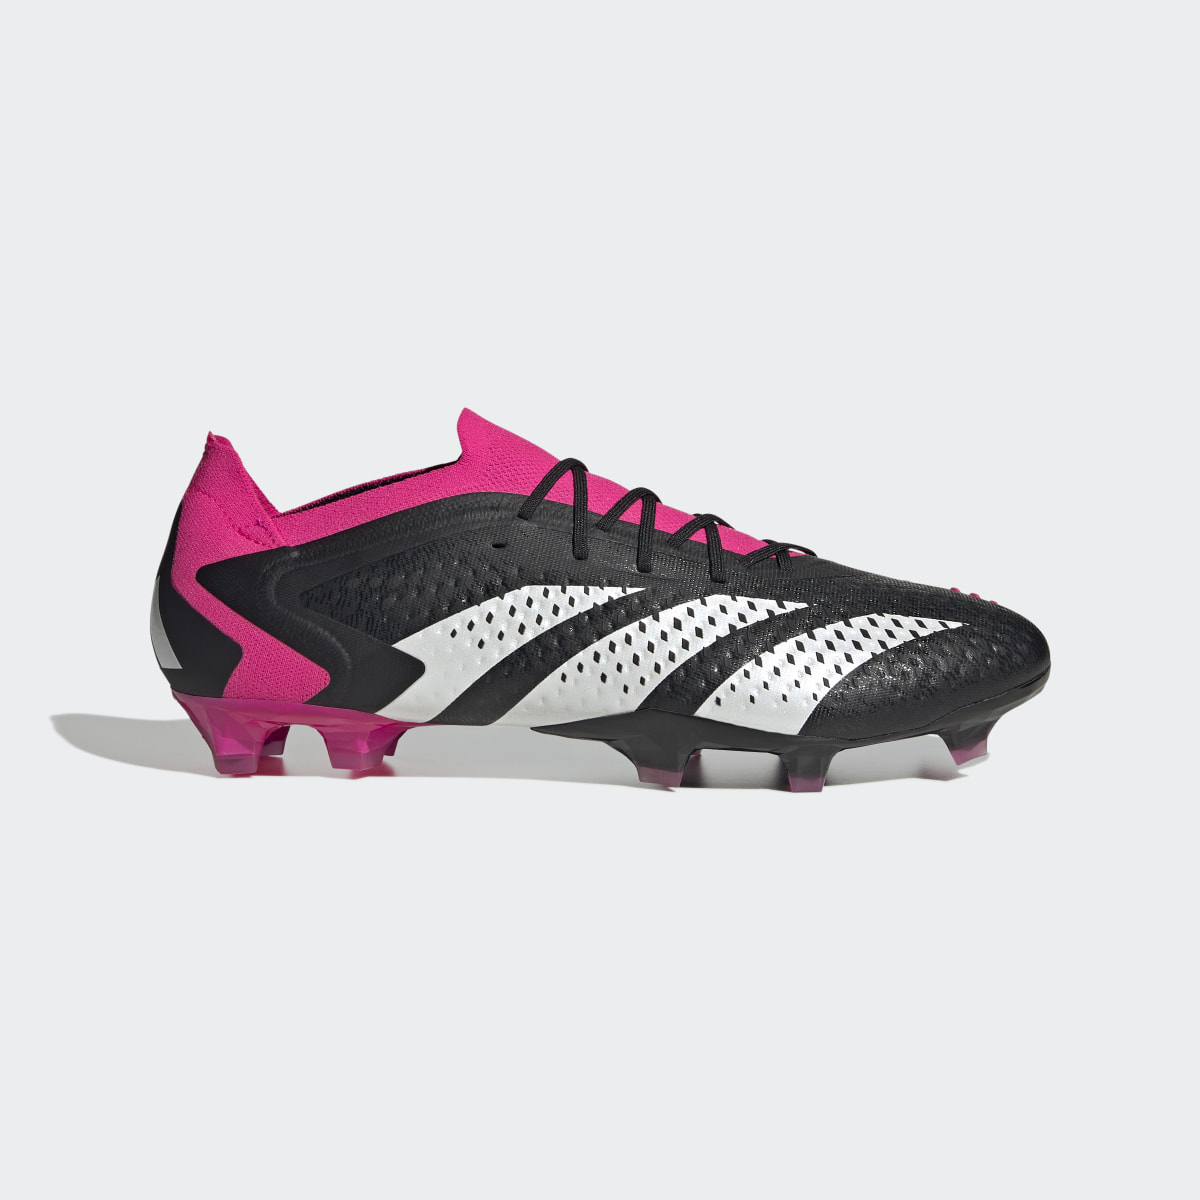 Adidas Predator Accuracy.1 Low Firm Ground Boots. 5